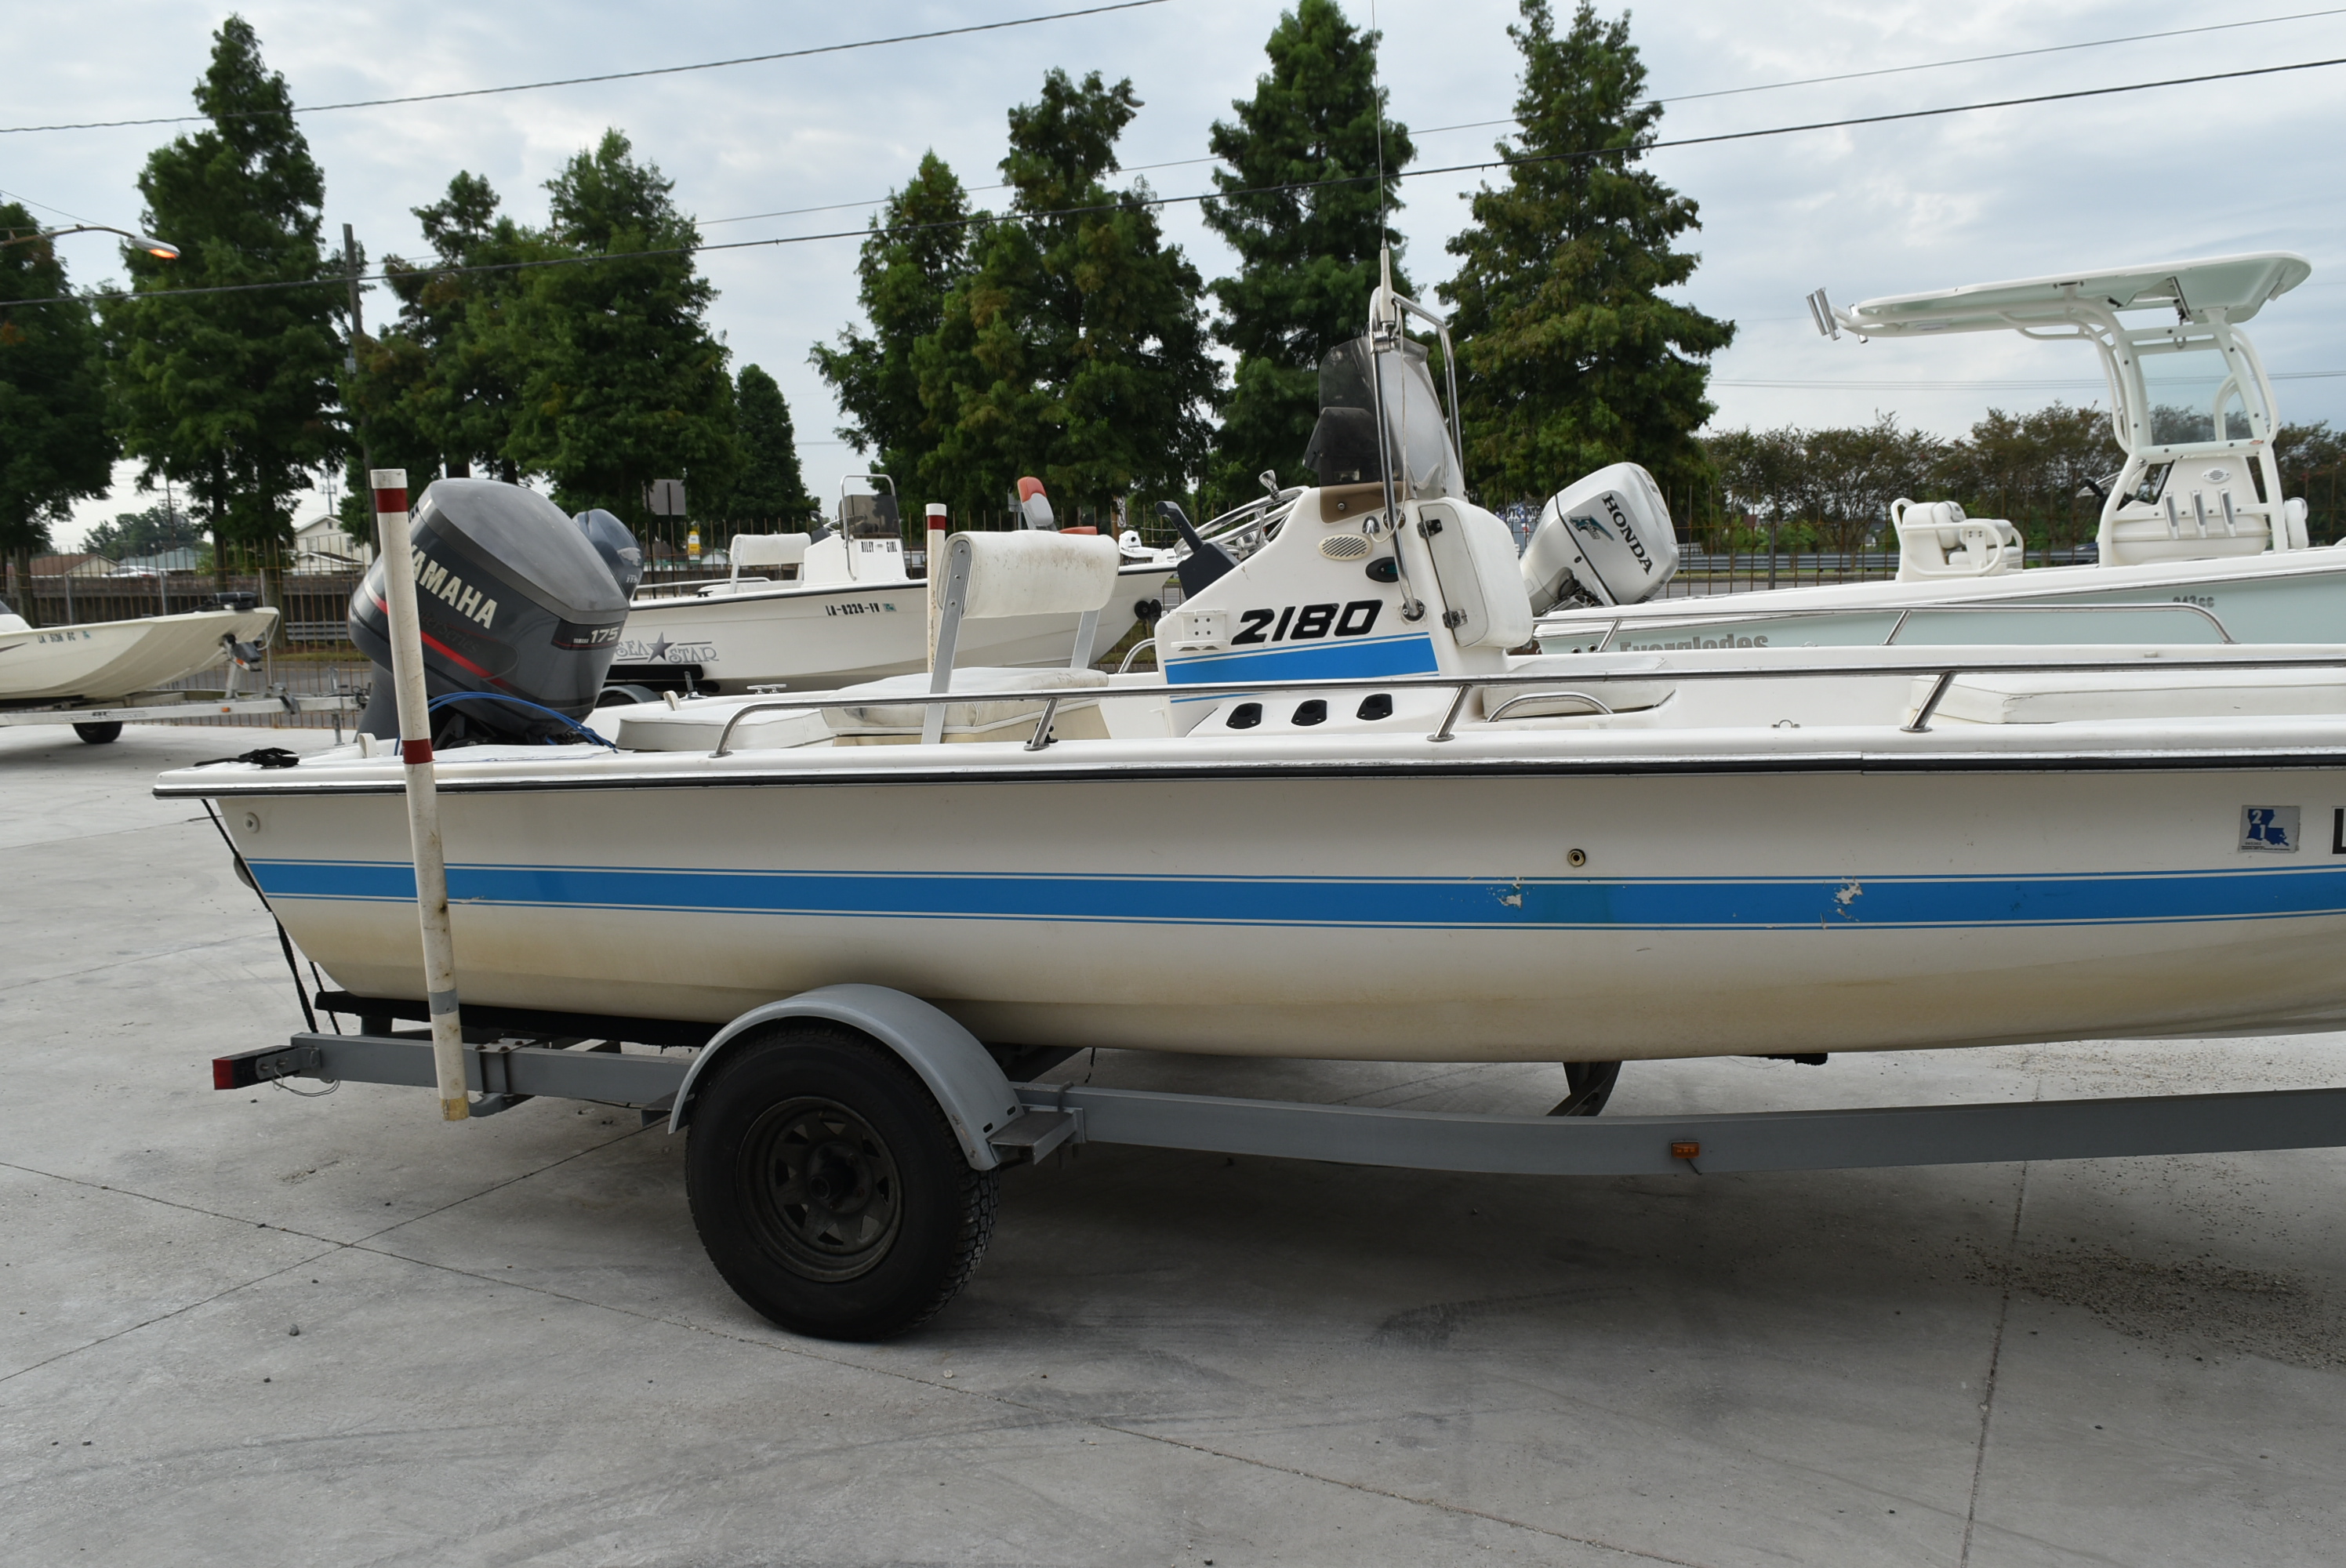 1995 Century boat for sale, model of the boat is 2180 & Image # 6 of 8